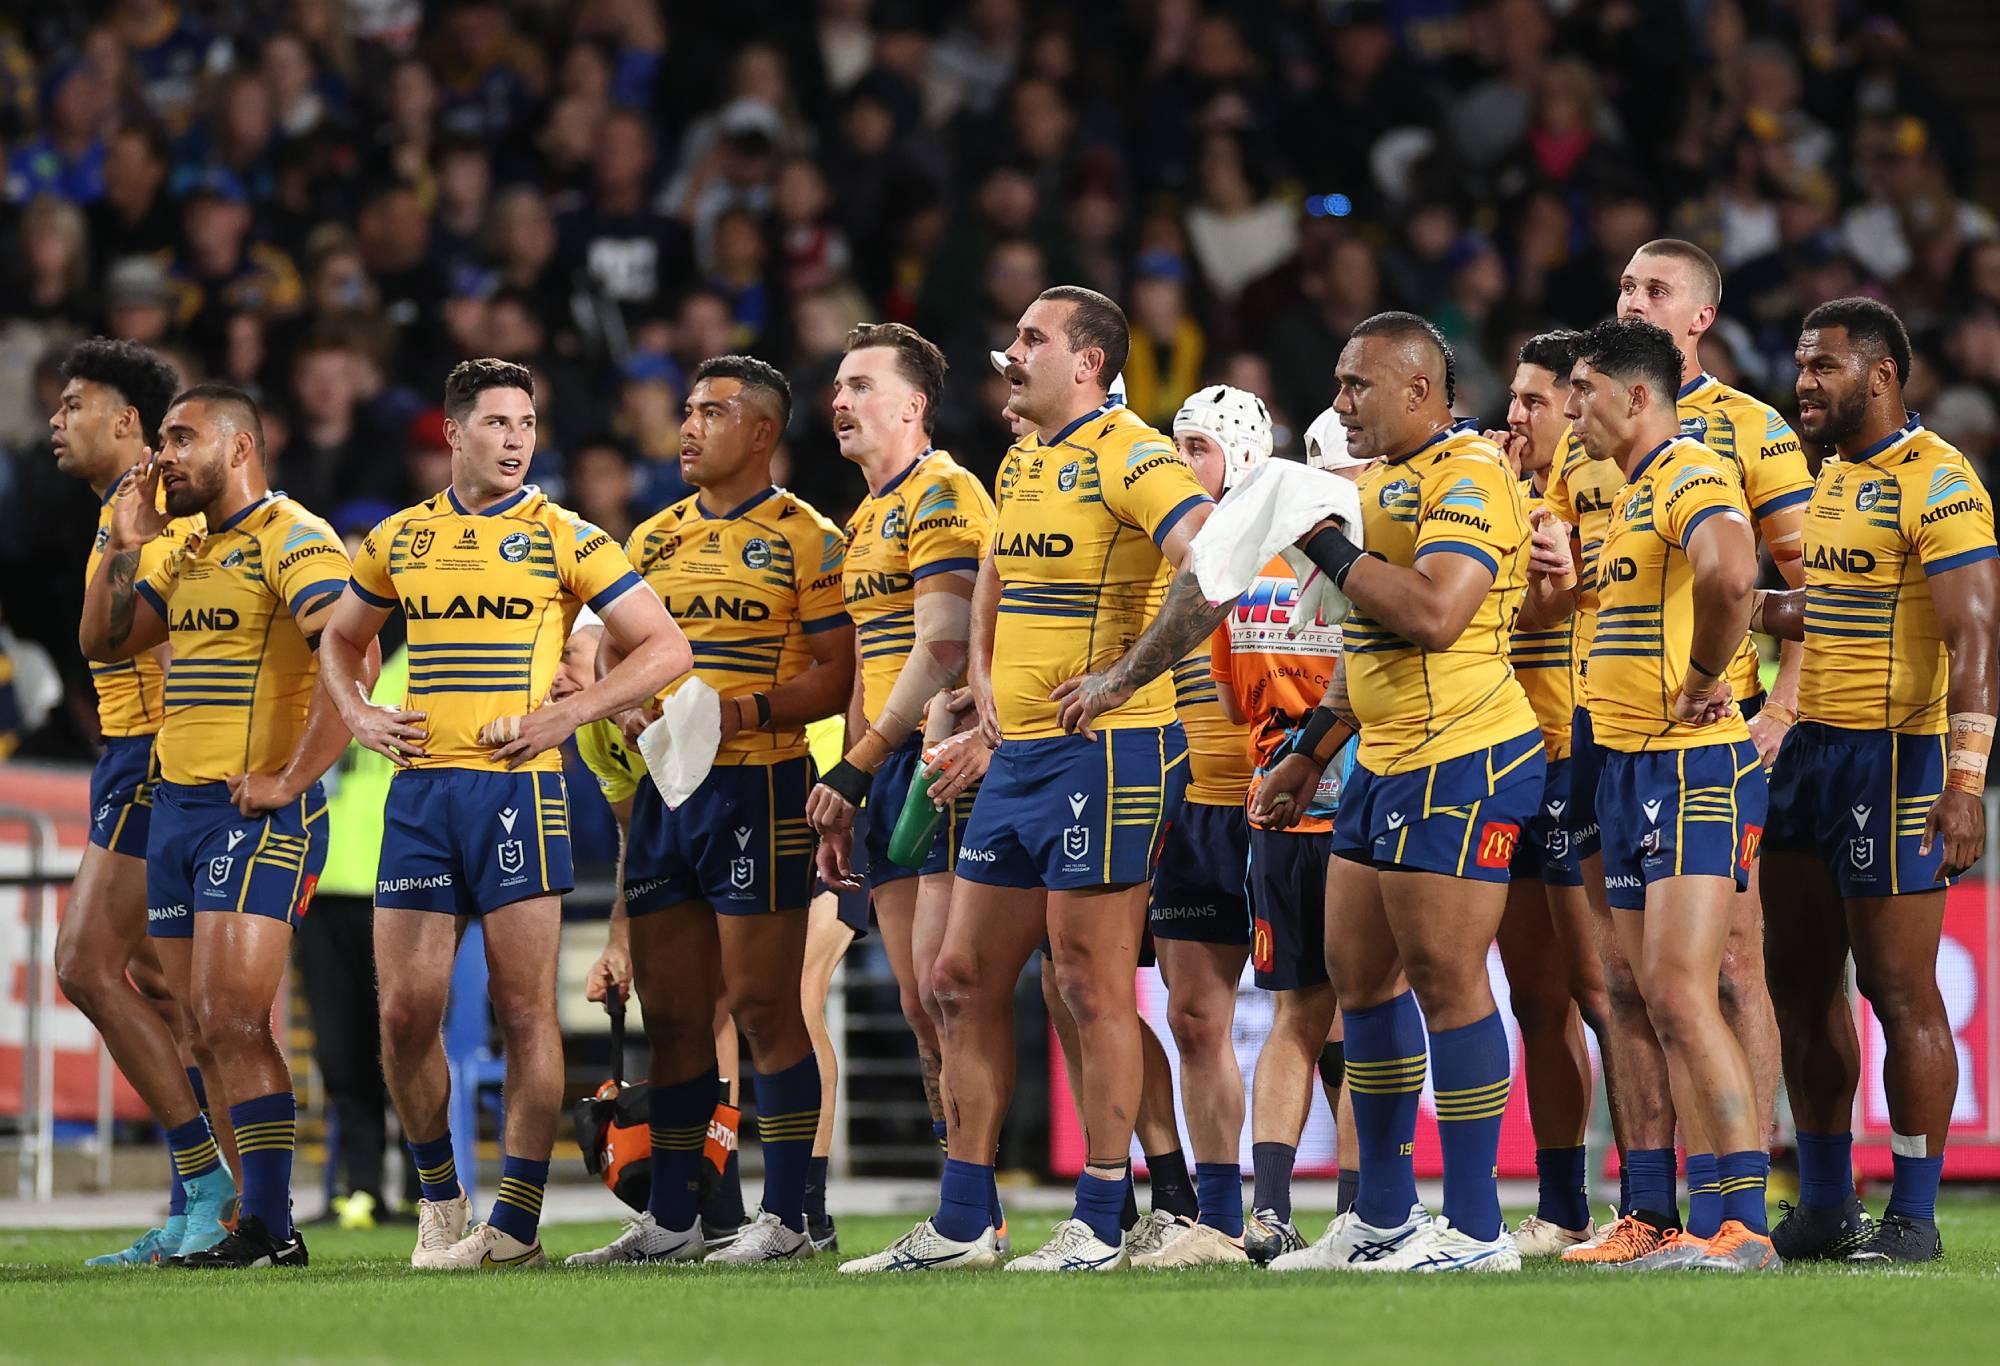 SYDNEY, AUSTRALIA - OCTOBER 02: Eels look onduring the 2022 NRL Grand Final match between the Penrith Panthers and the Parramatta Eels at Accor Stadium on October 02, 2022, in Sydney, Australia. (Photo by Cameron Spencer/Getty Images)